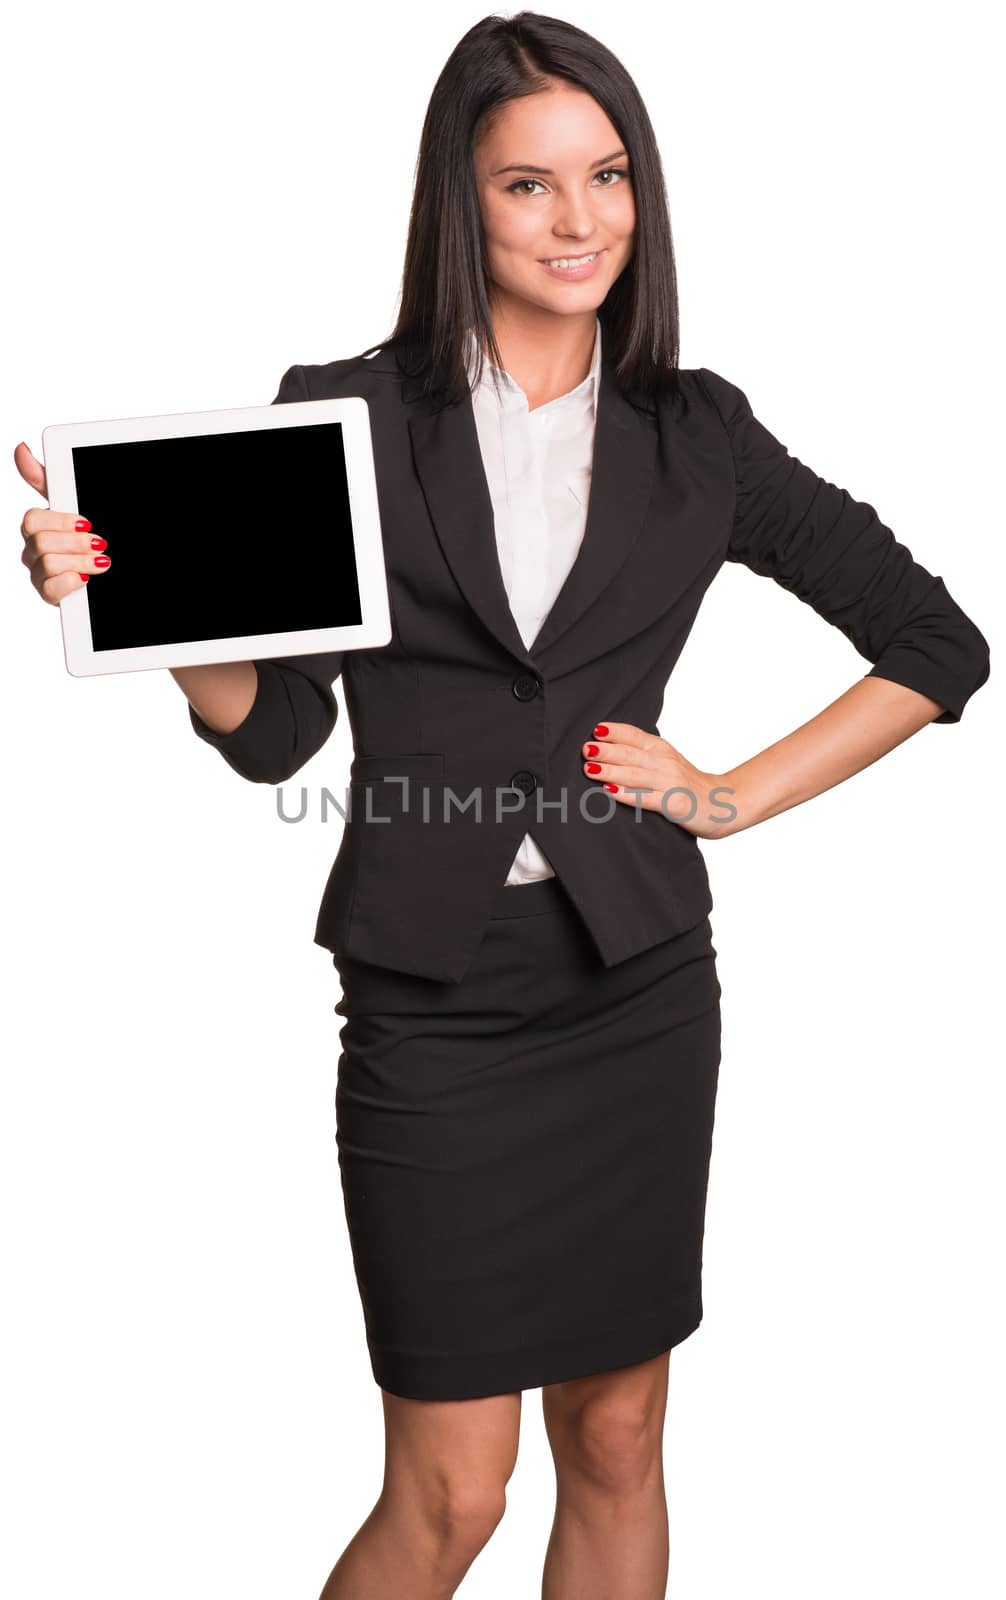 Beautiful businesswoman in suit holding a tablet. Hand on hip. Isolated on white background